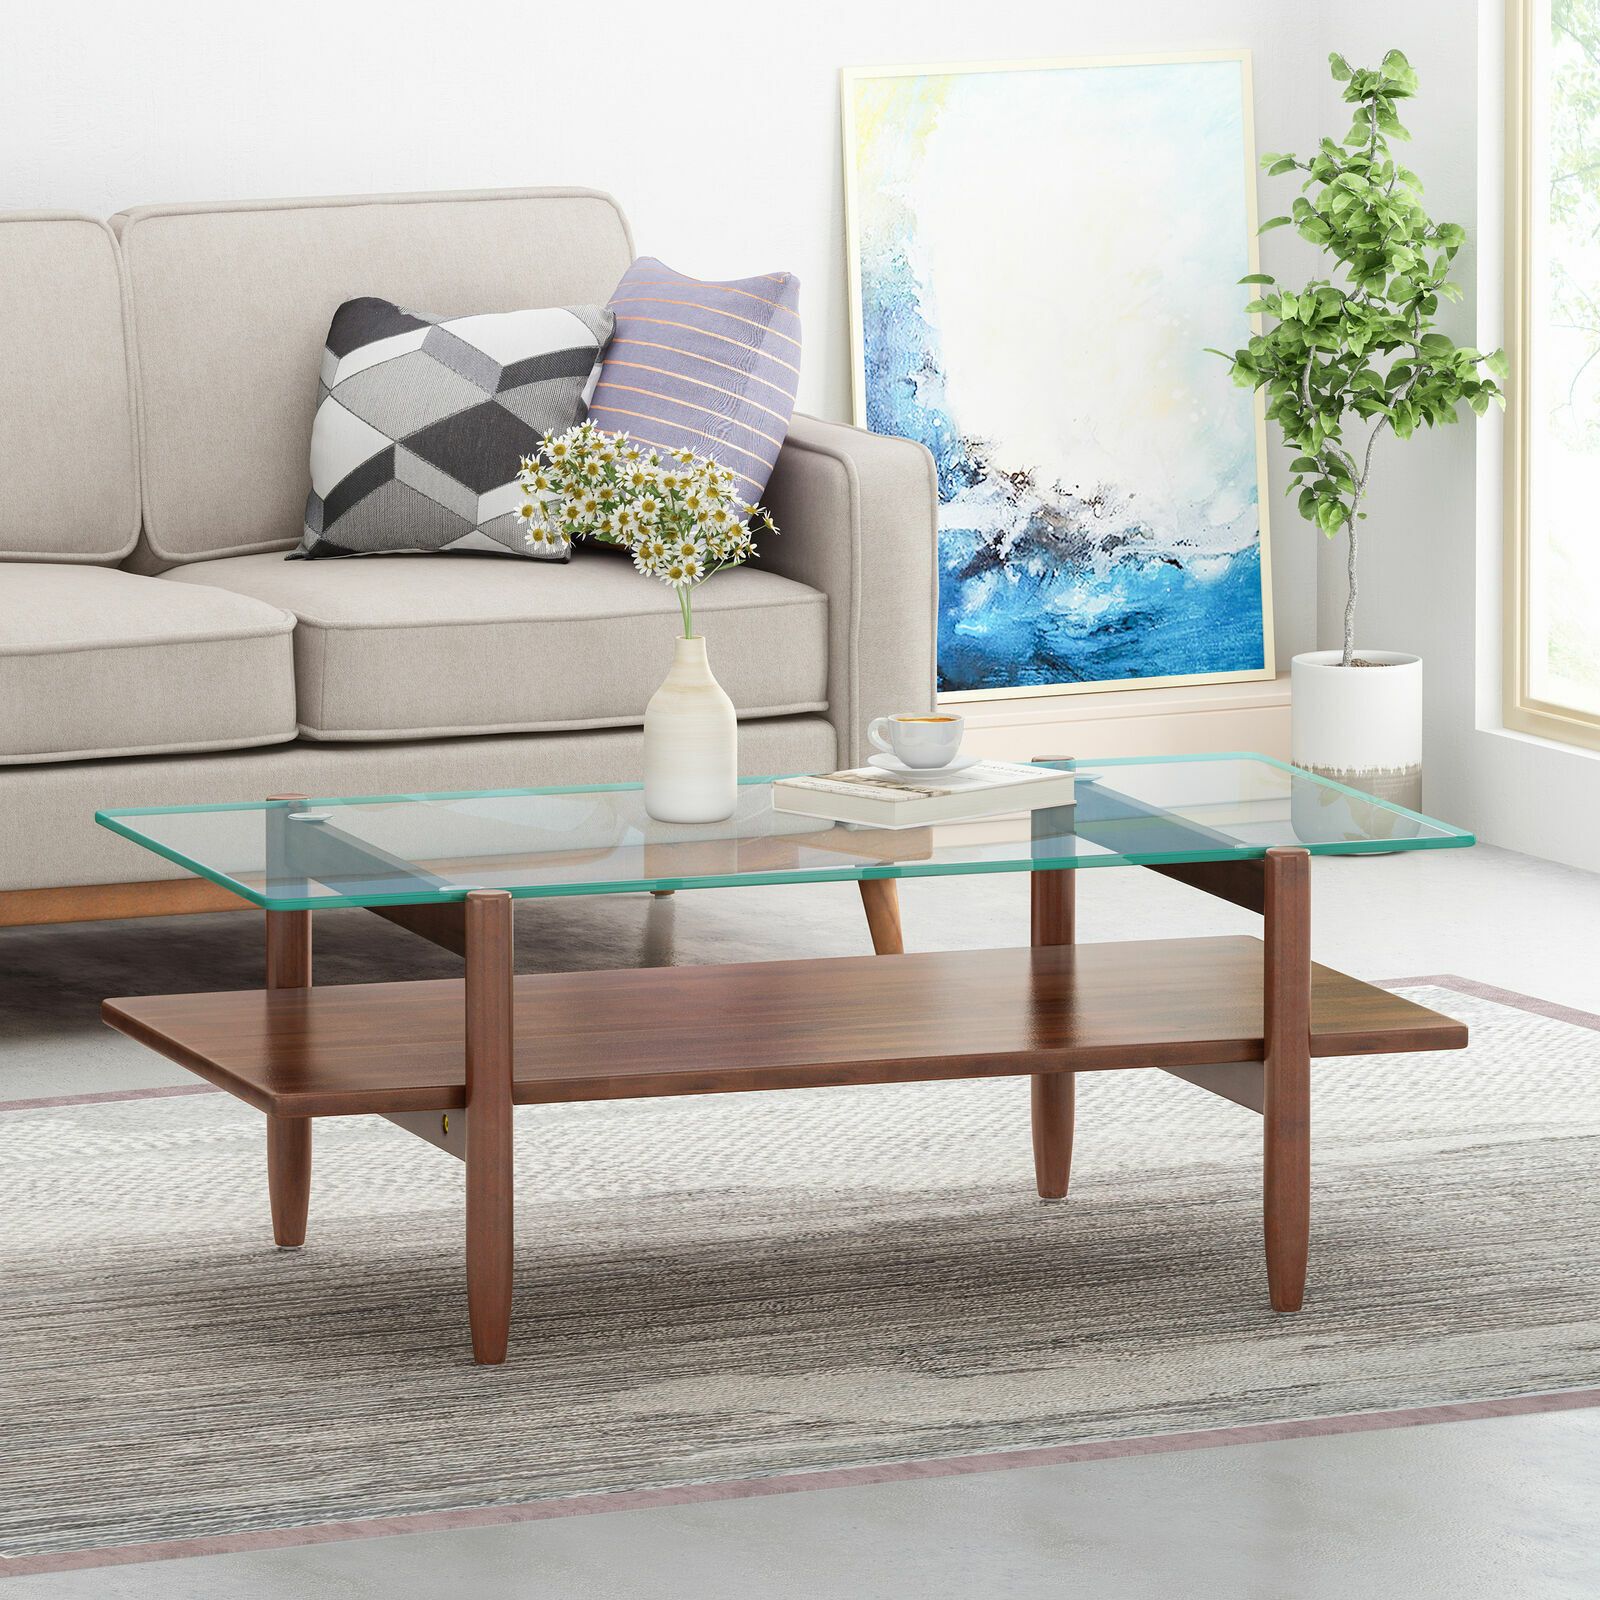 Janitza Acacia Wood Coffee Table With Tempered Glass Top | Ebay With Regard To Tempered Glass Top Coffee Tables (View 5 of 20)